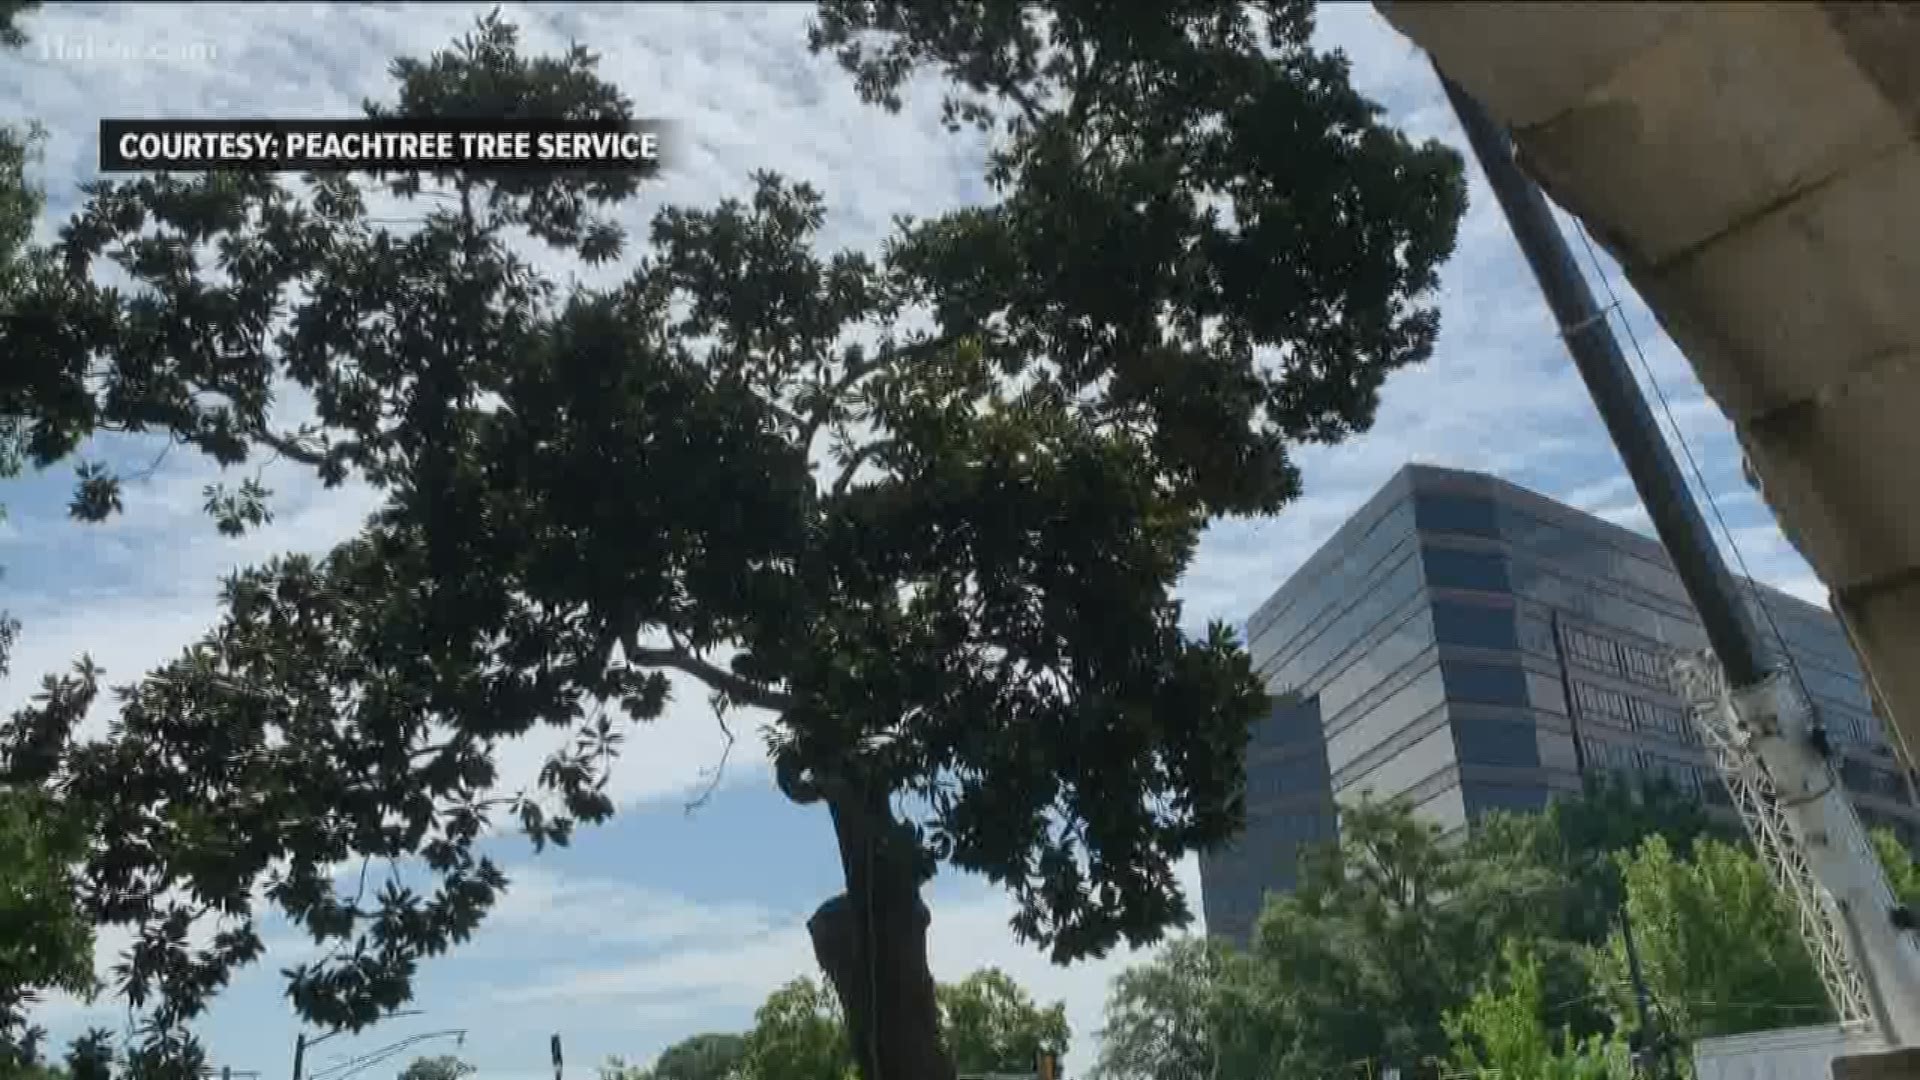 The Atlanta Business Chronicle reports that the city said the tree was a risk.